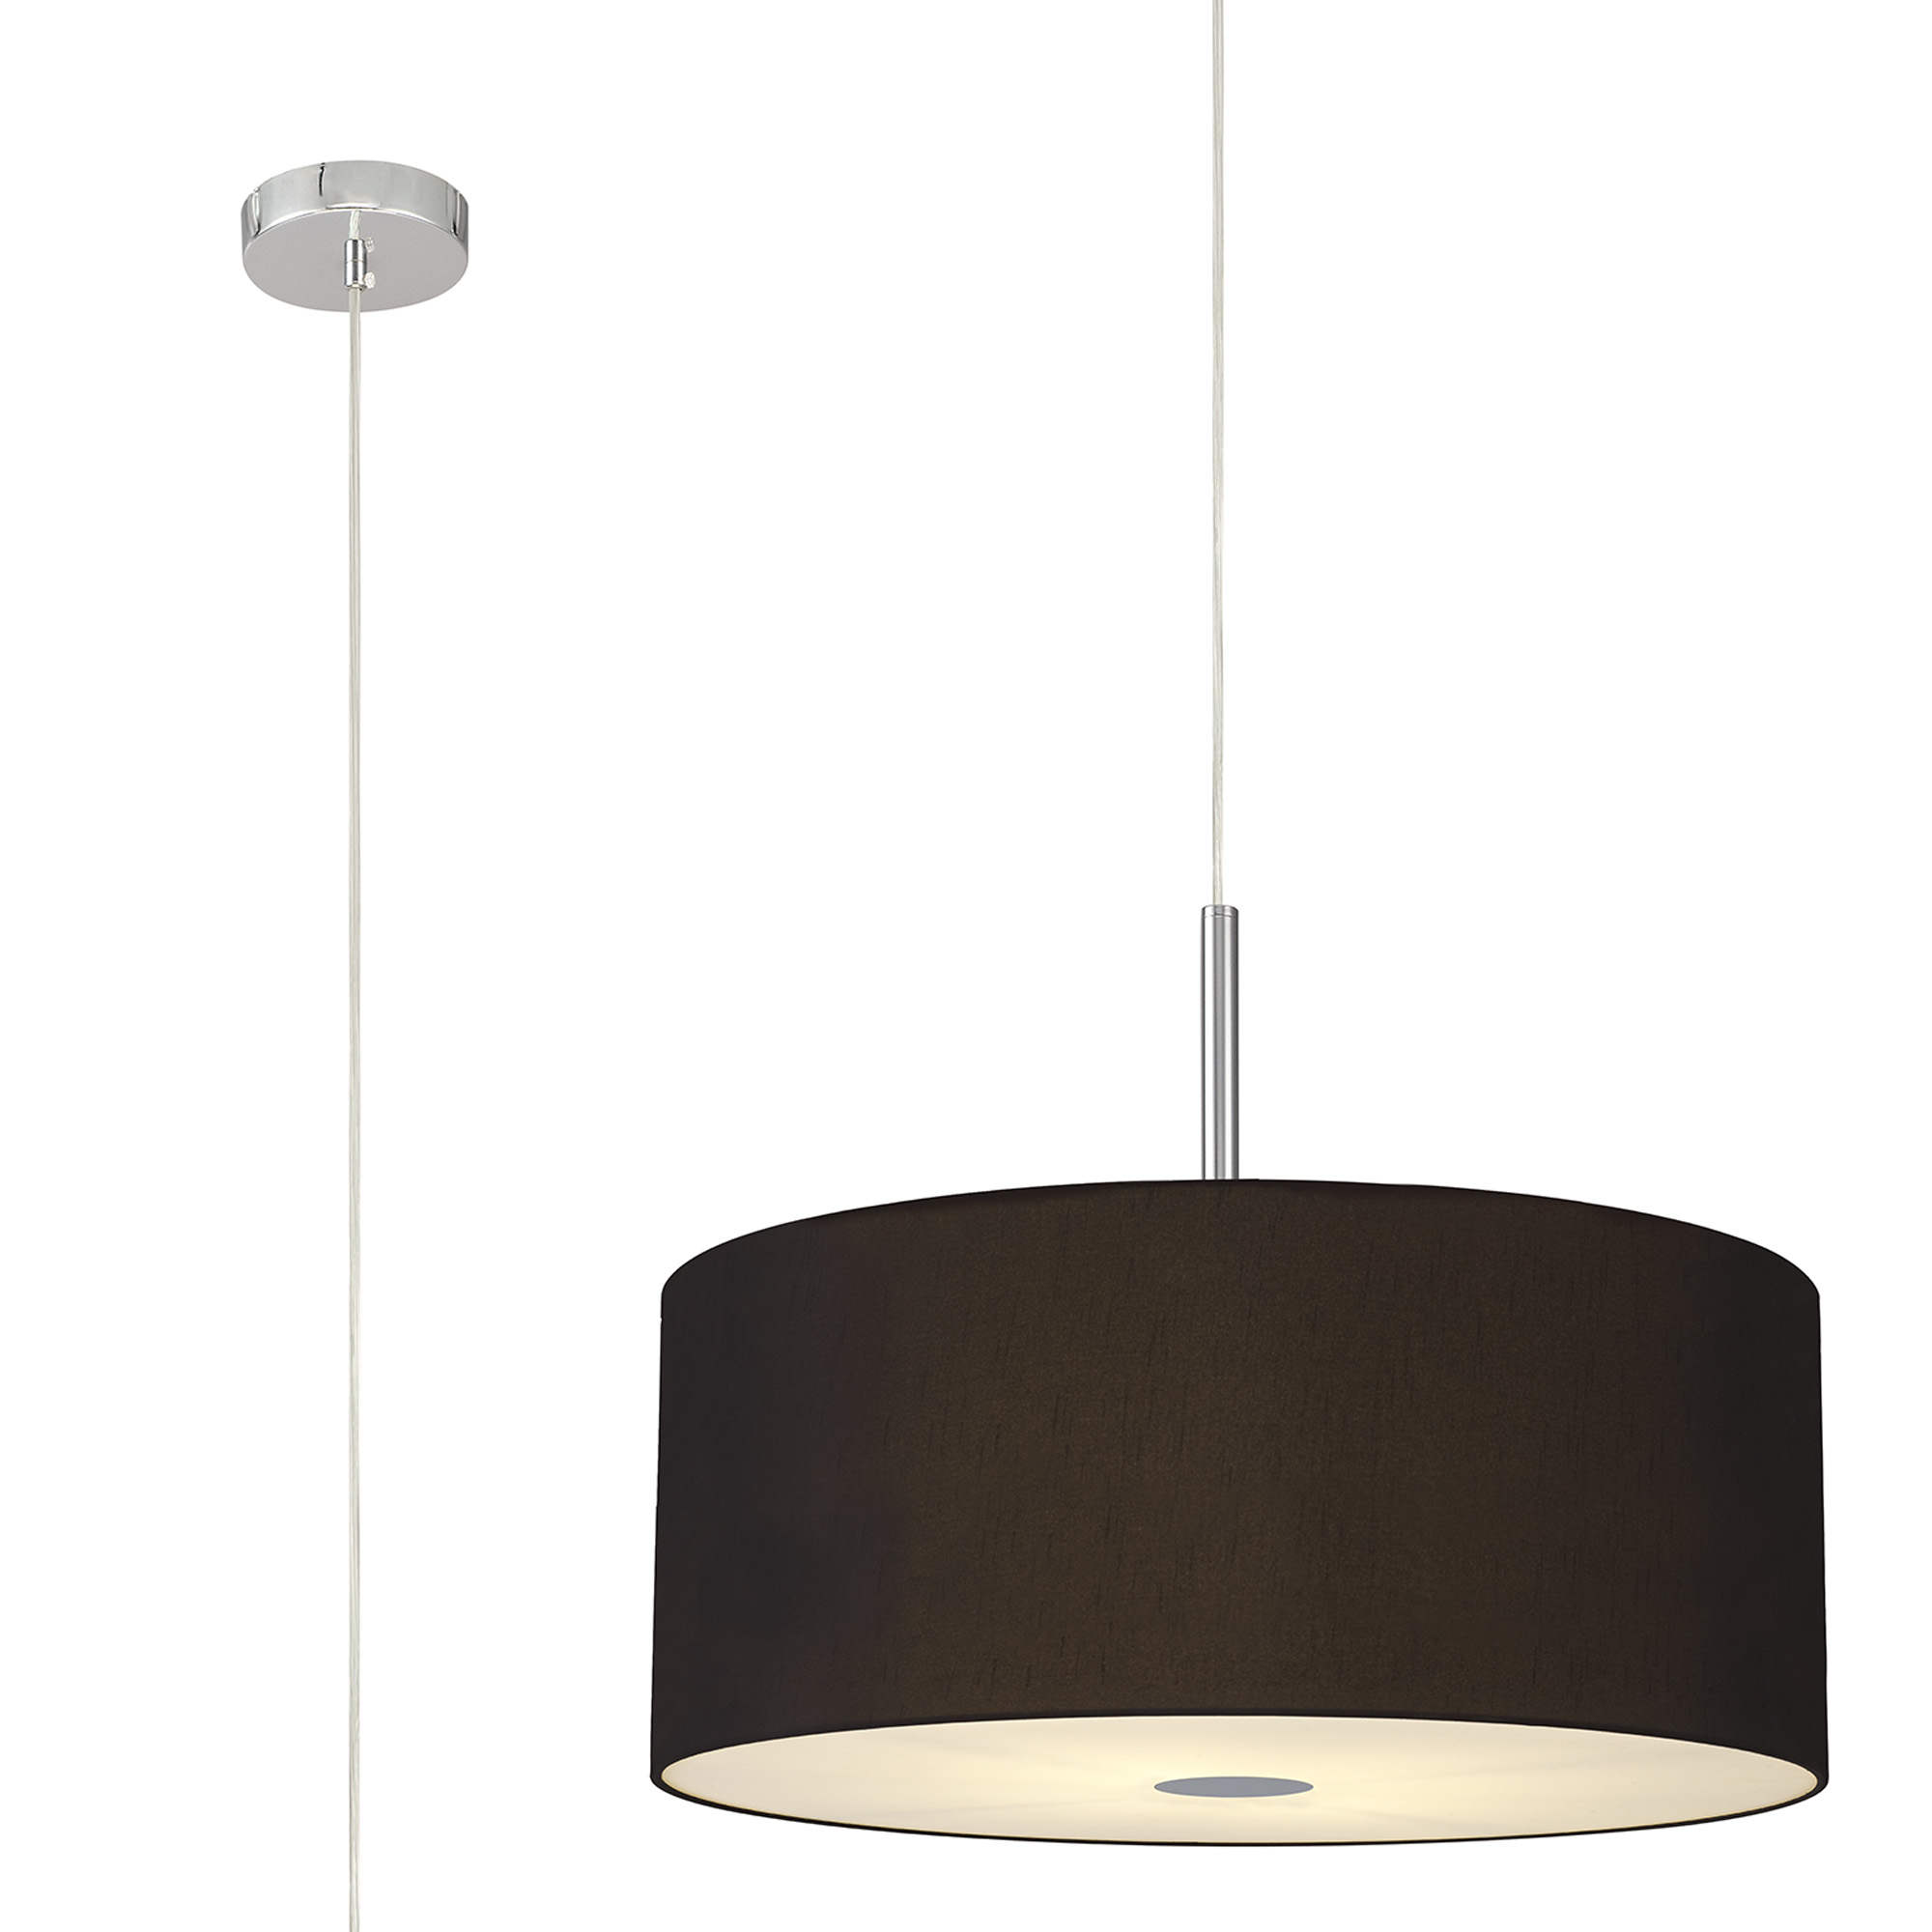 DK0479  Baymont 60cm 5 Light Pendant Polished Chrome, Midnight Black/Green Olive, Frosted Diffuser